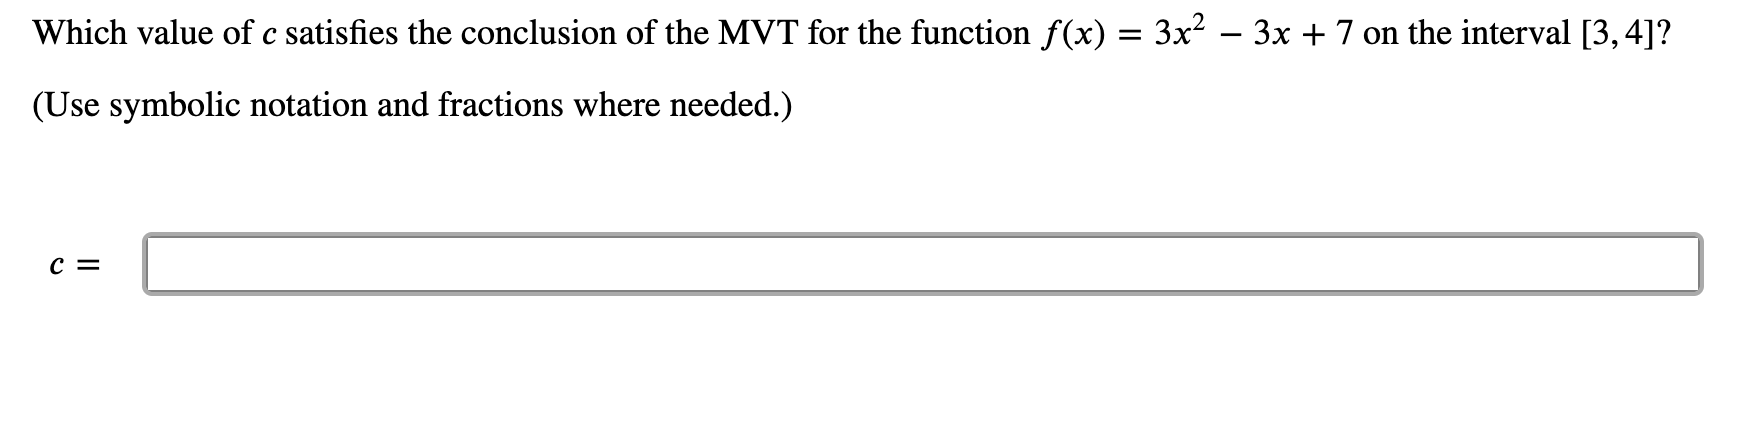 Which value of c satisfies the conclusion of the MVT for the function f(x) = 3x² – 3x + 7 on the interval [3, 4]?
(Use symbolic notation and fractions where needed.)
c =
